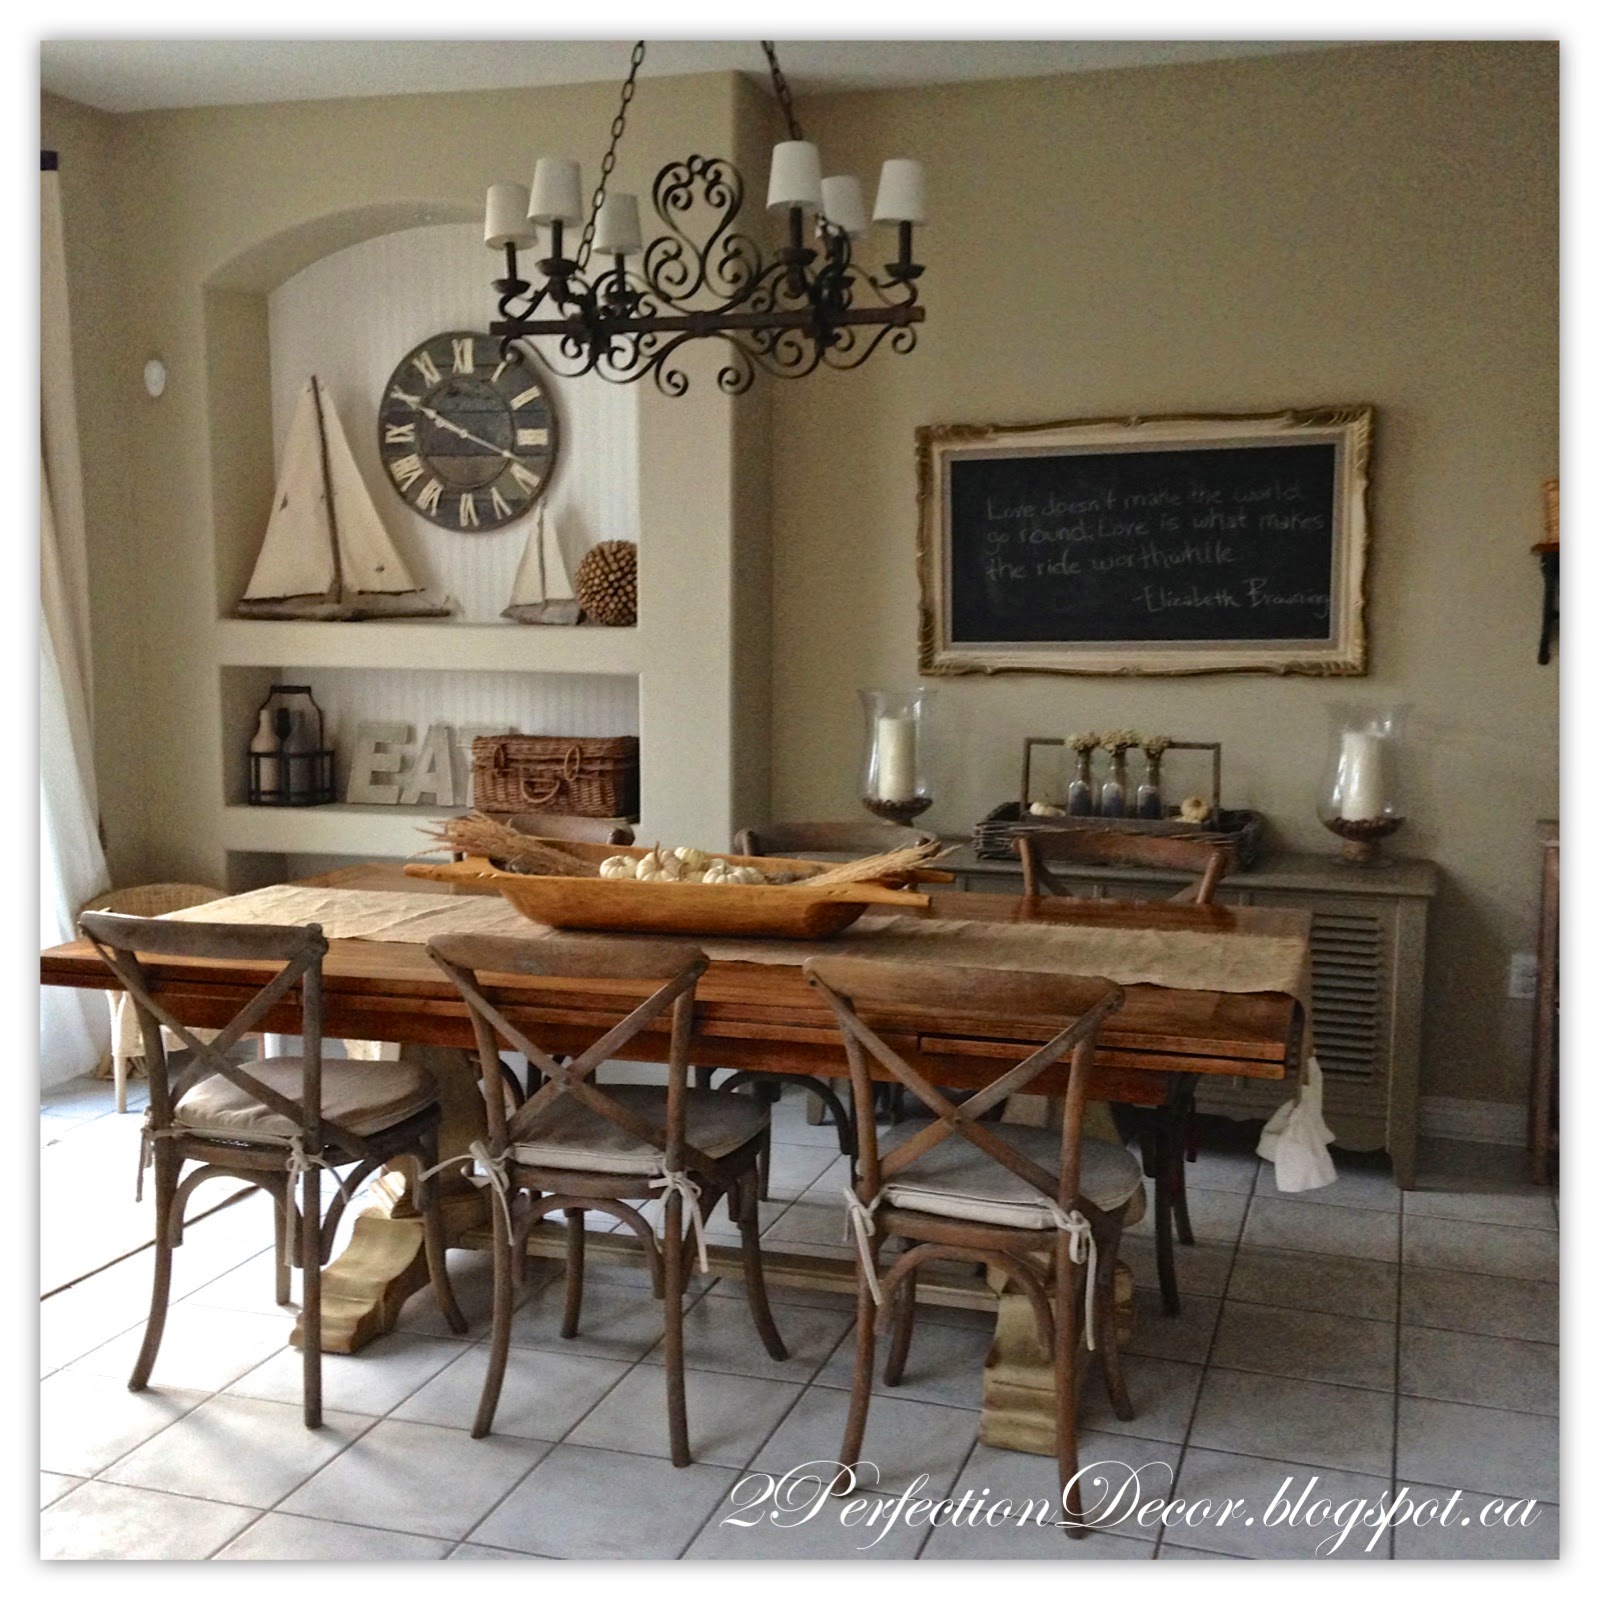 2Perfection Decor  Kitchen  Eating  Area  Reveal